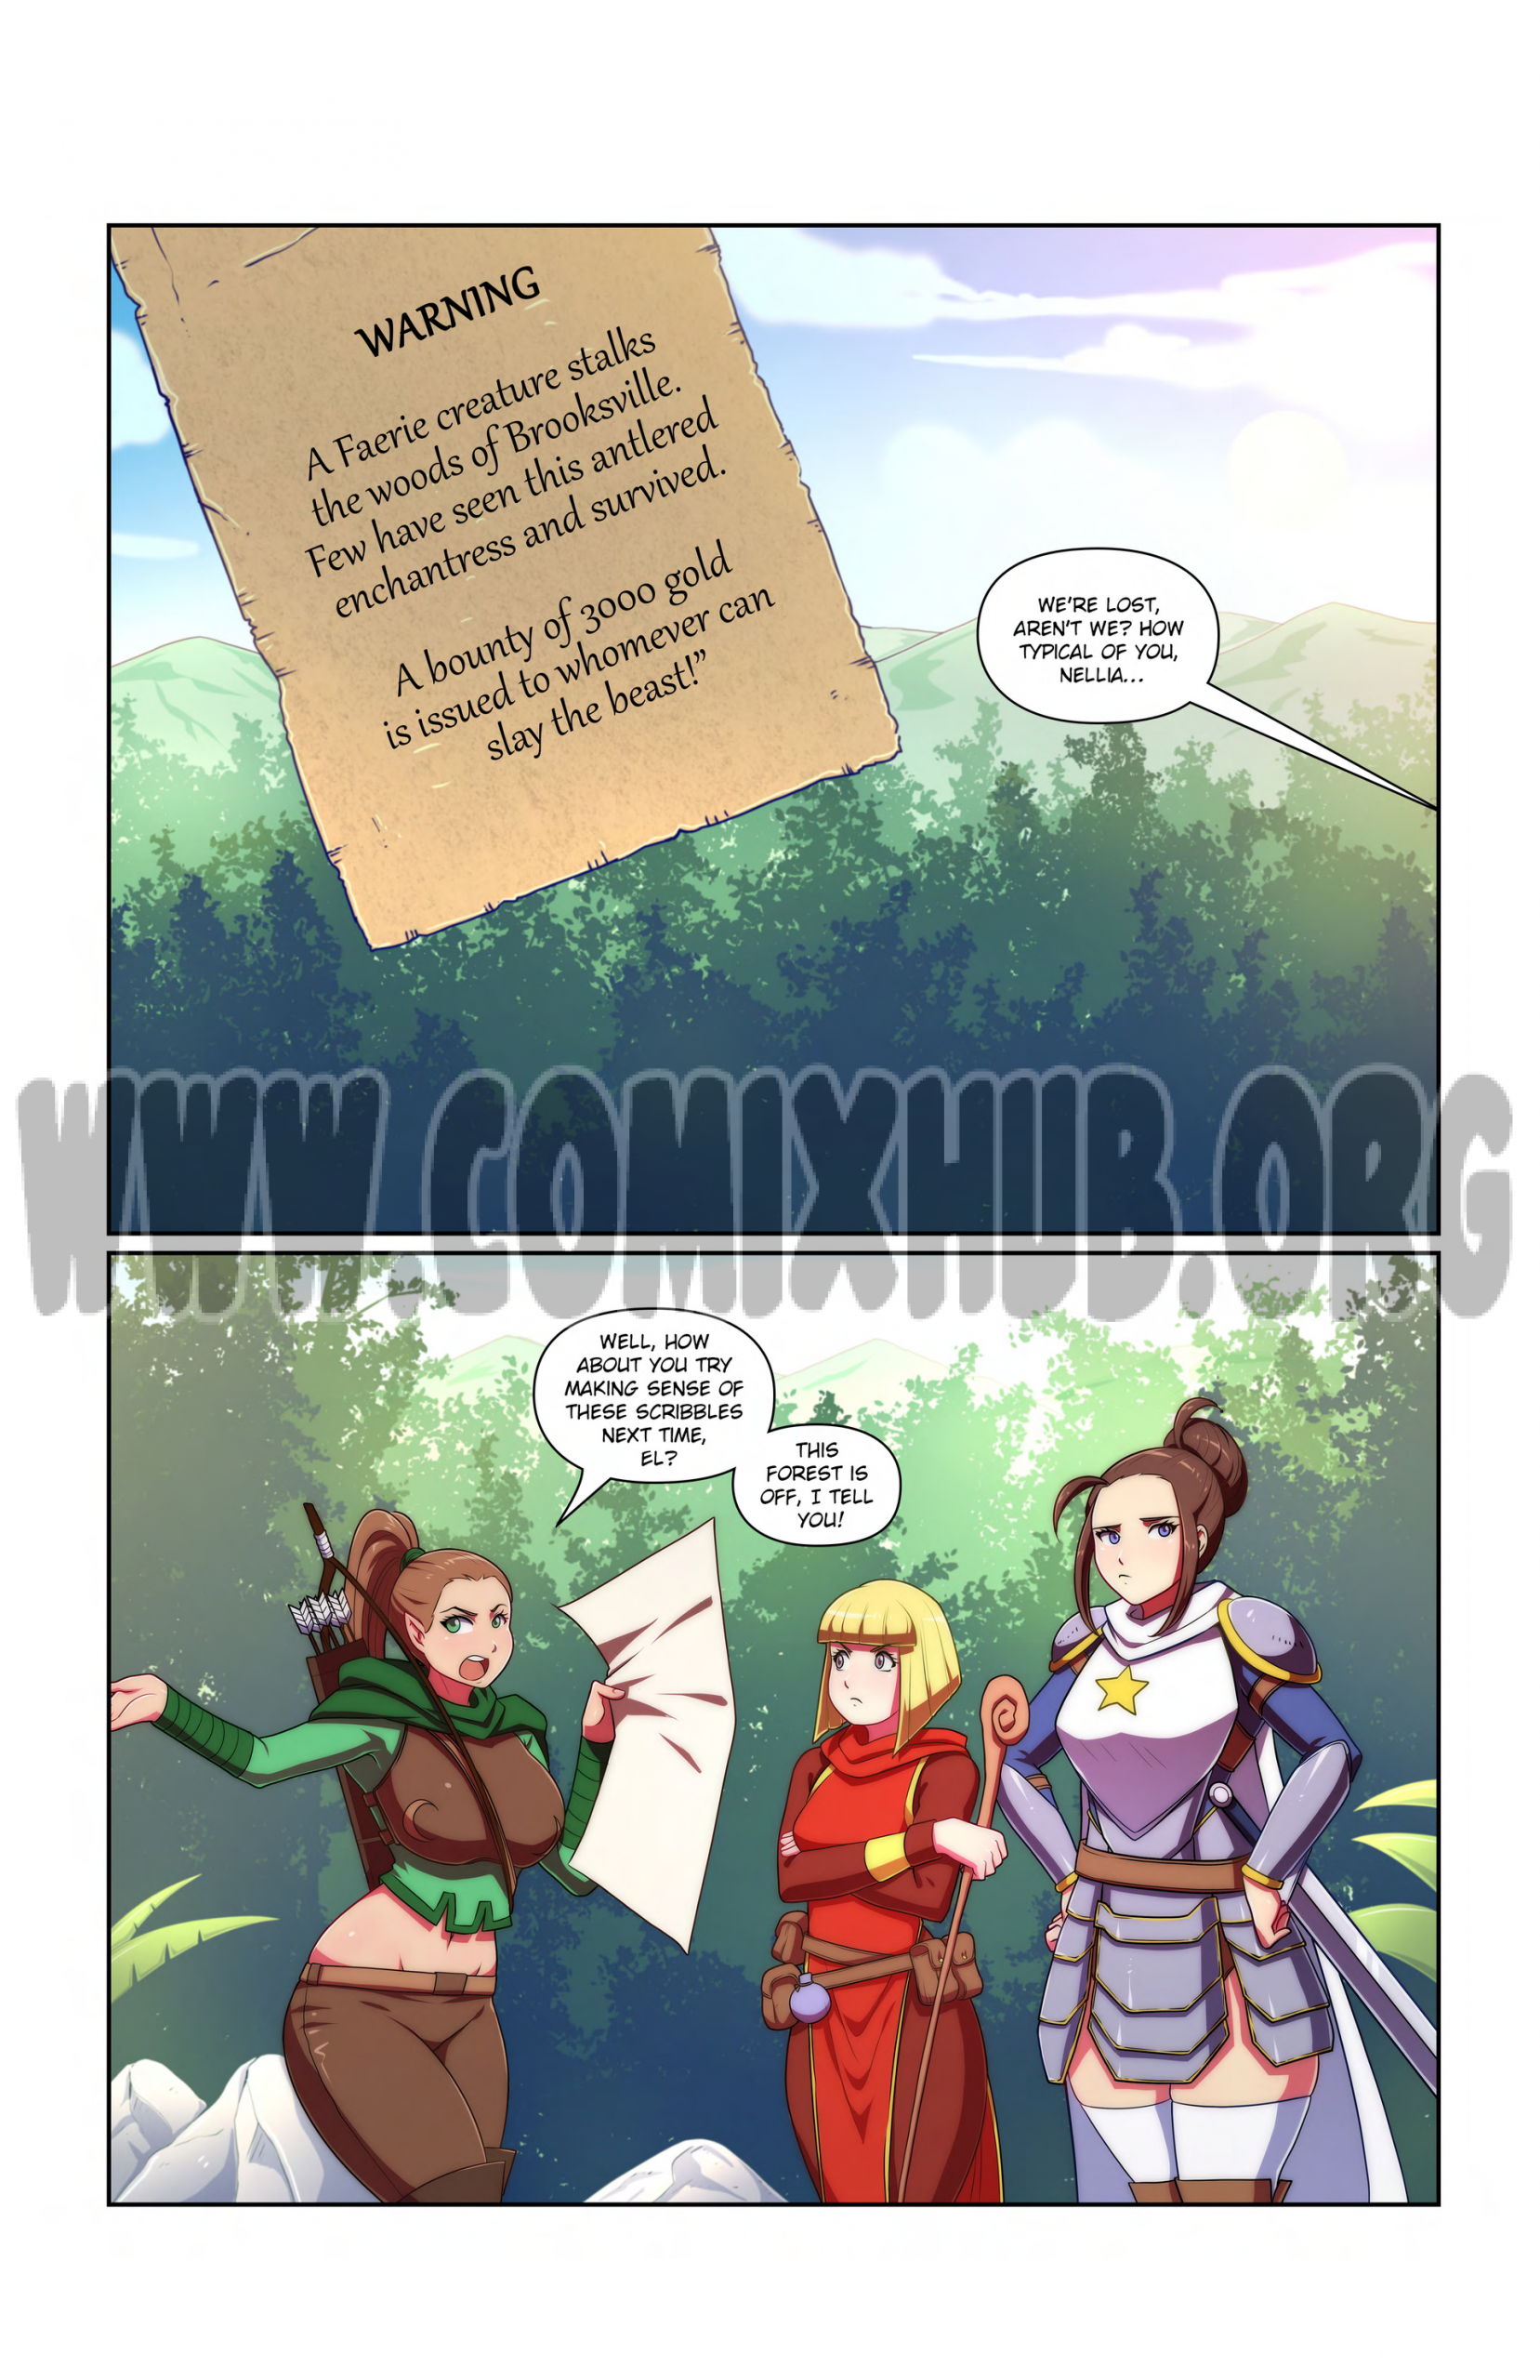 Lost in the Woods porn comics Oral sex, Big Tits, cunnilingus, Fantasy, Monster Girls, Sex and Magic